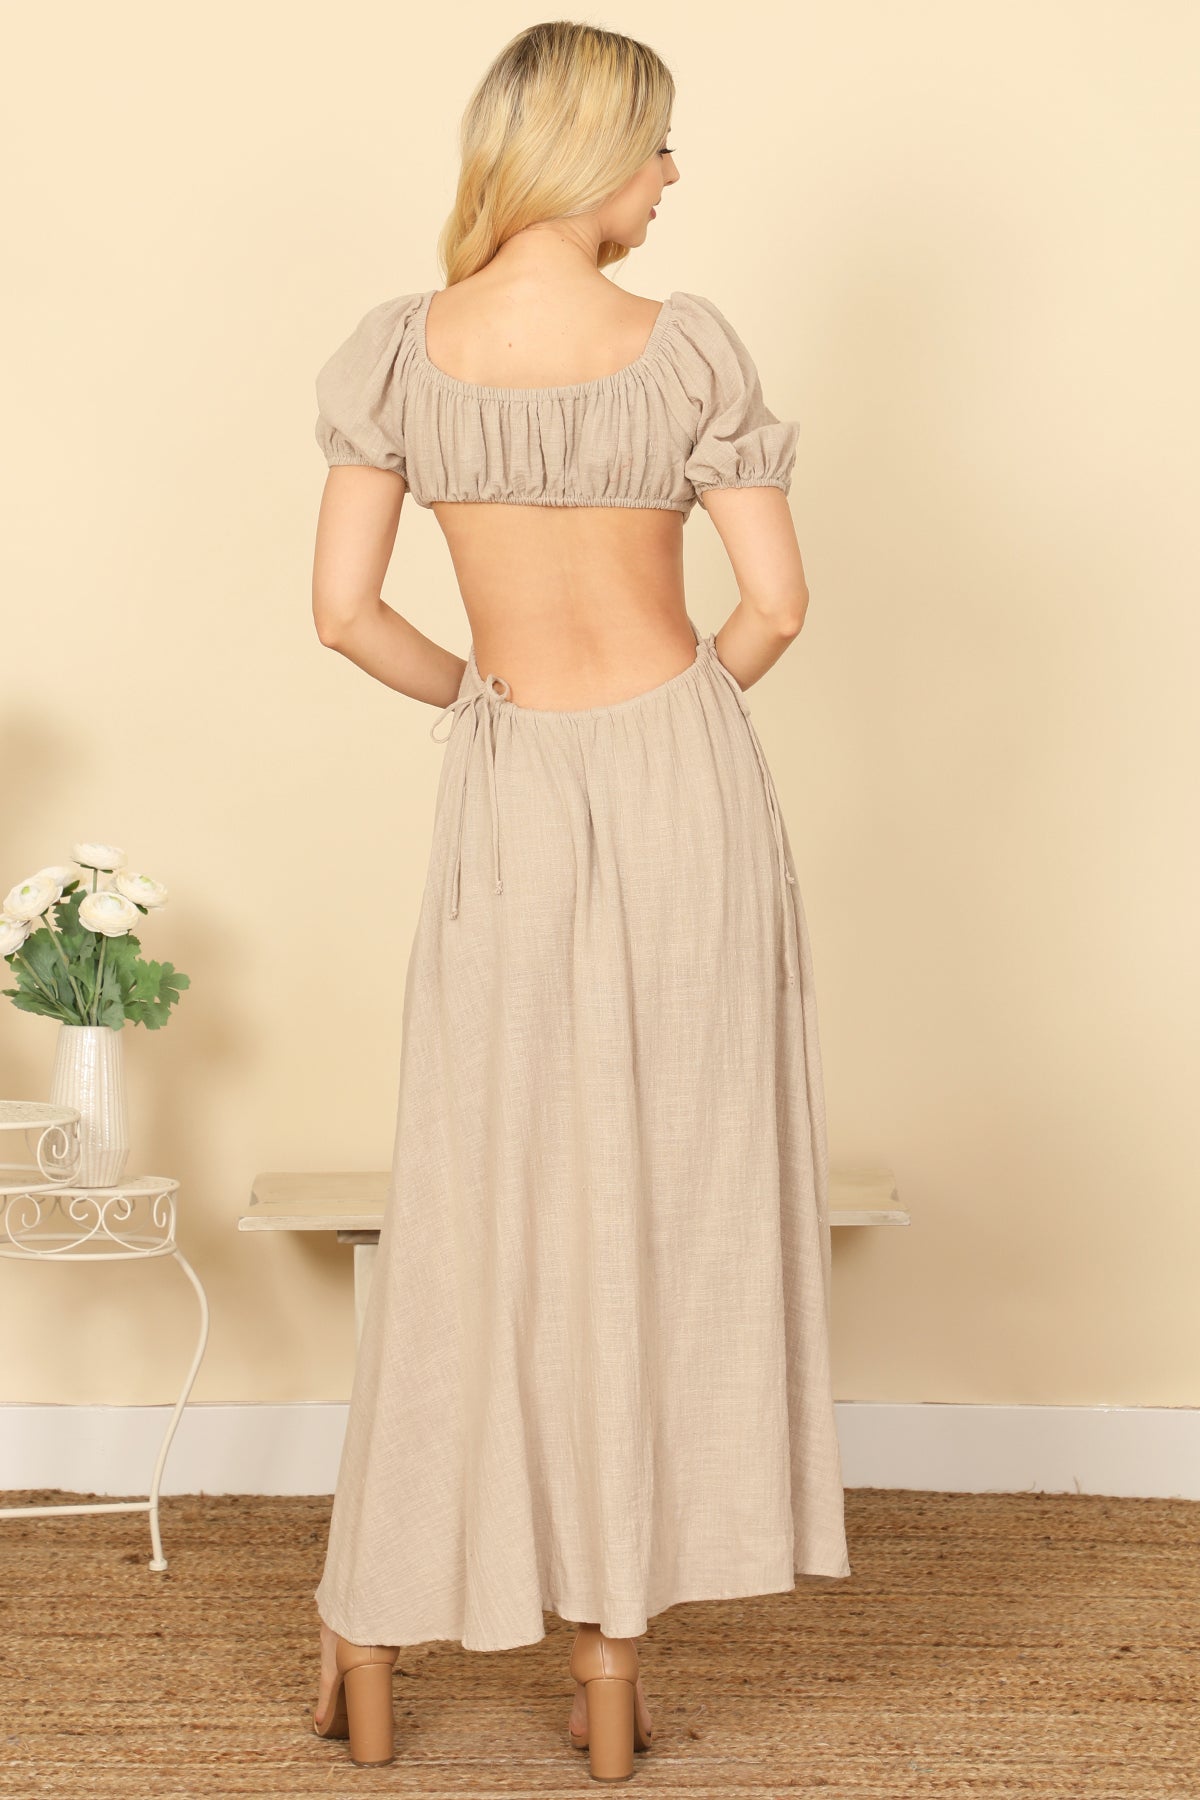 SIDE CUT-OUT DETAIL PUFF SLEEVE SOLID MAXI DRESS 2-2-1